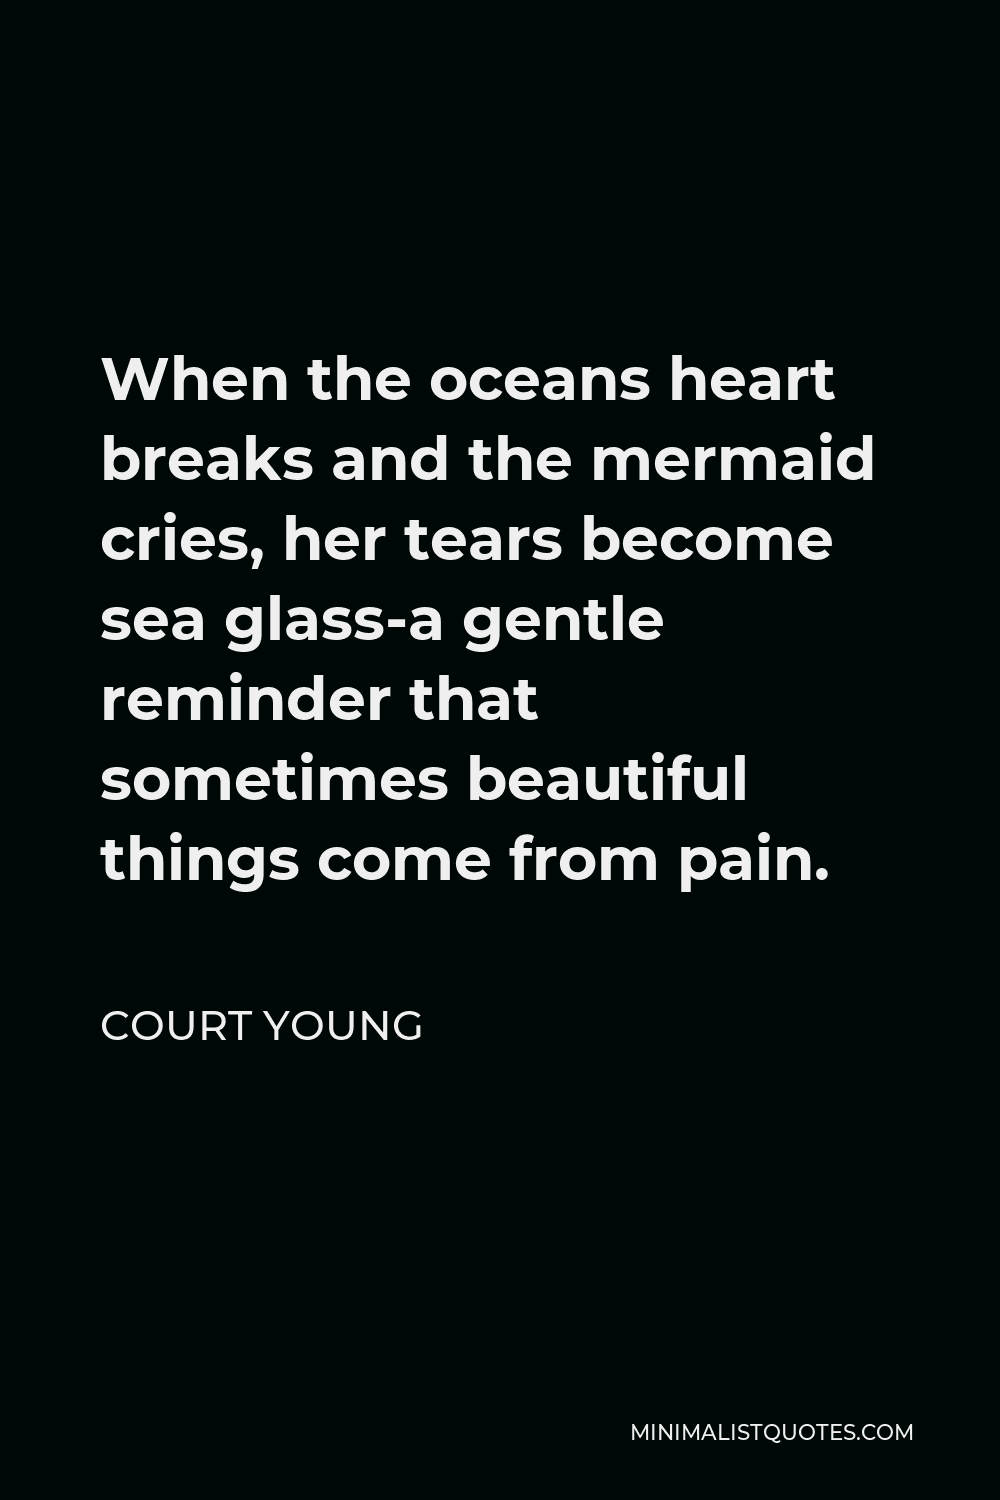 Court Young Quote - When the oceans heart breaks and the mermaid cries, her tears become sea glass-a gentle reminder that sometimes beautiful things come from pain.